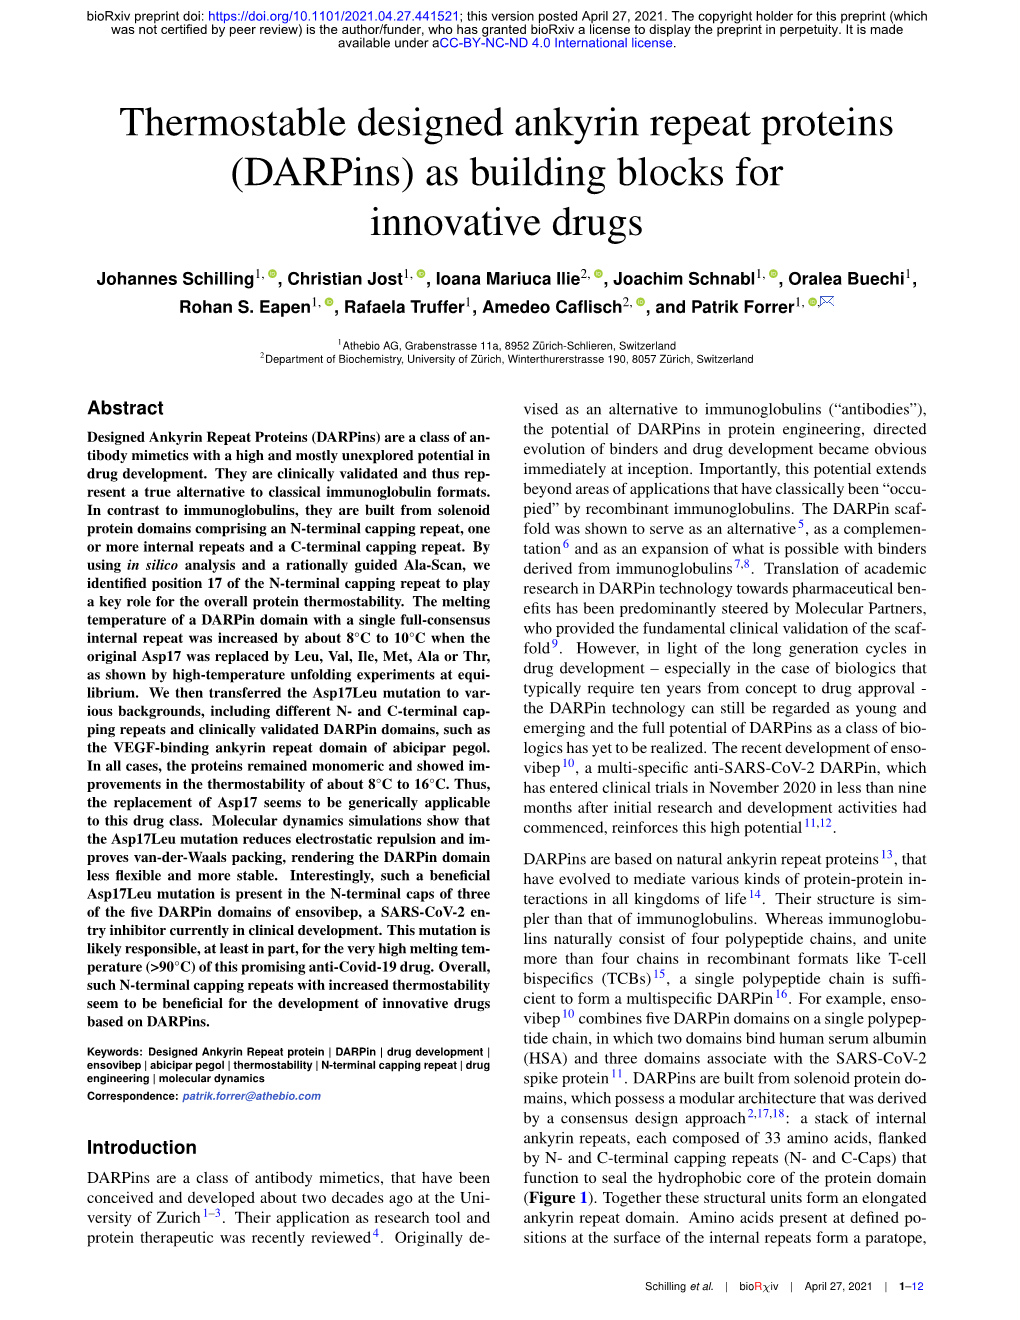 Thermostable Designed Ankyrin Repeat Proteins (Darpins) As Building Blocks for Innovative Drugs